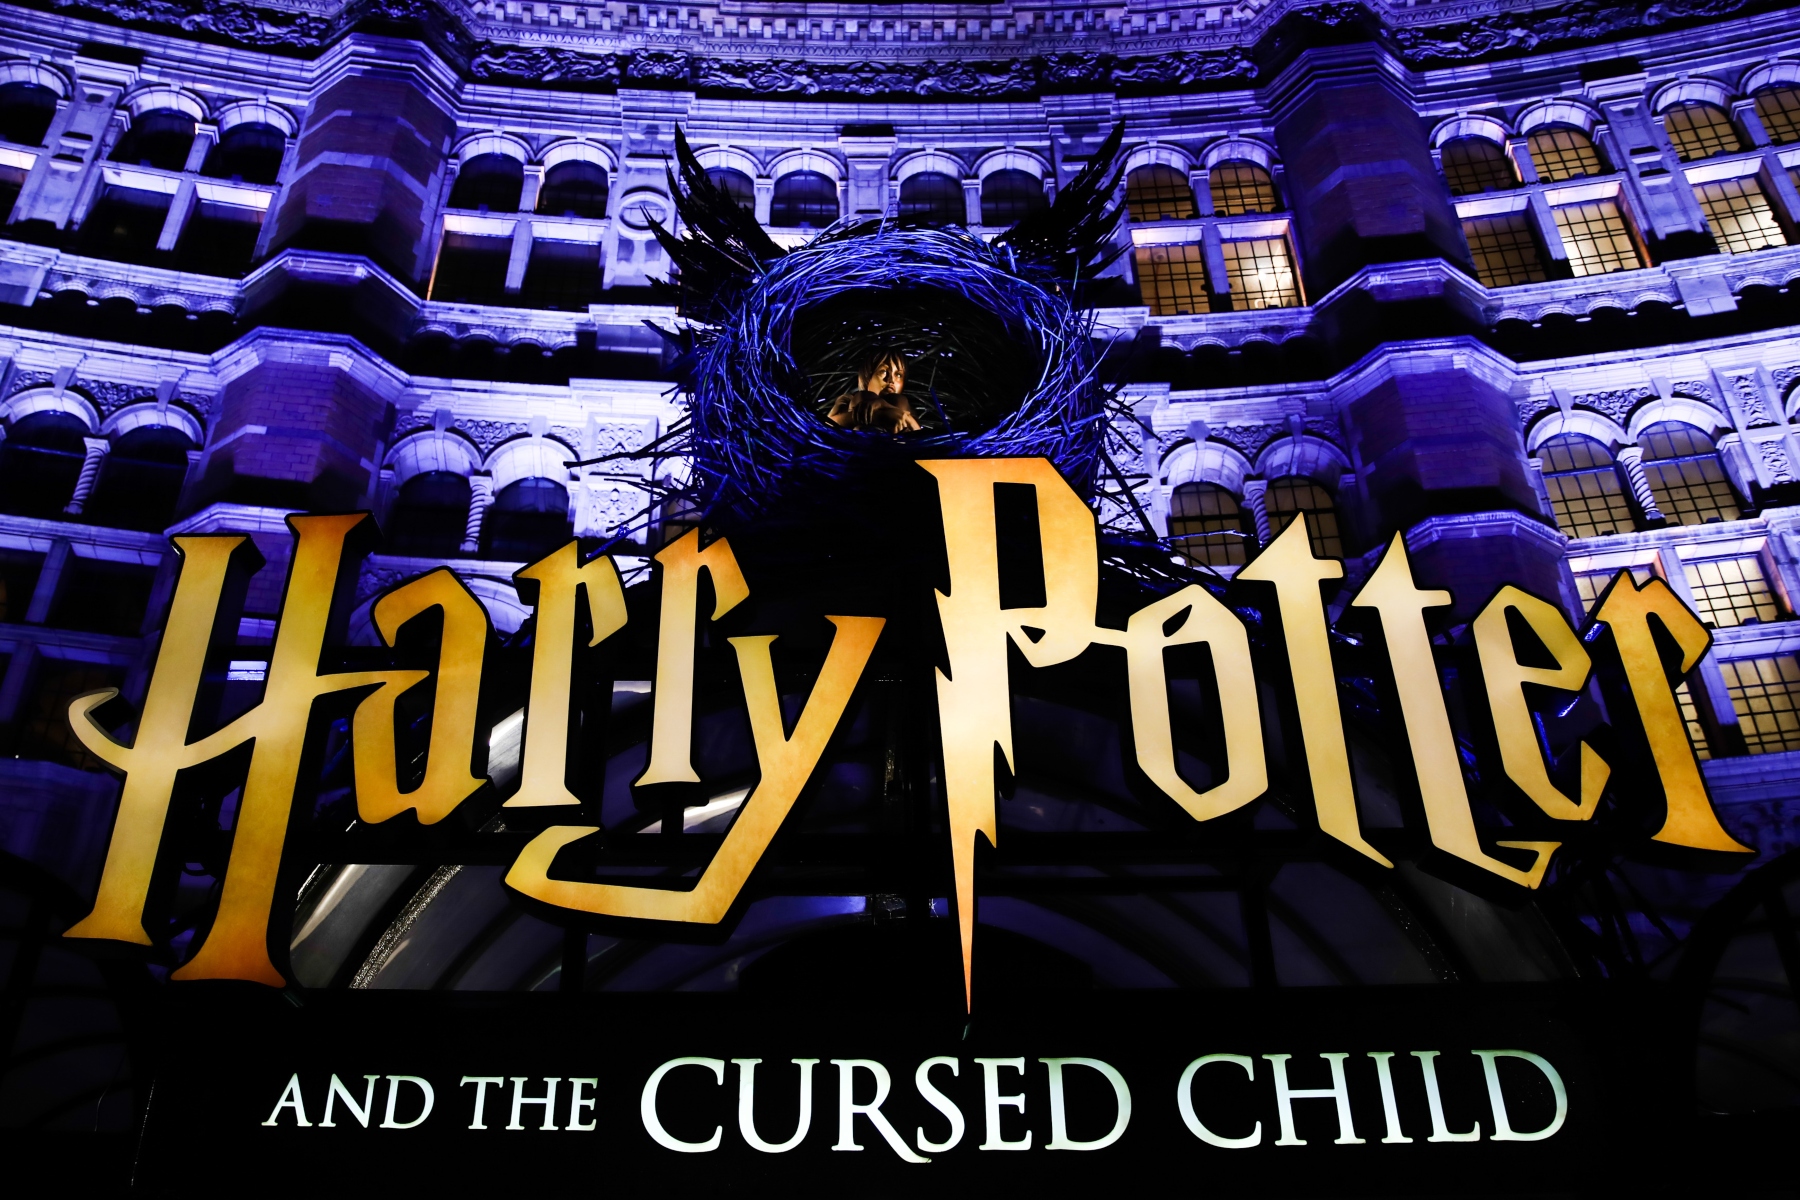 ‘Harry Potter and the Cursed Child’ logo is seen on the Palace Theatre in London